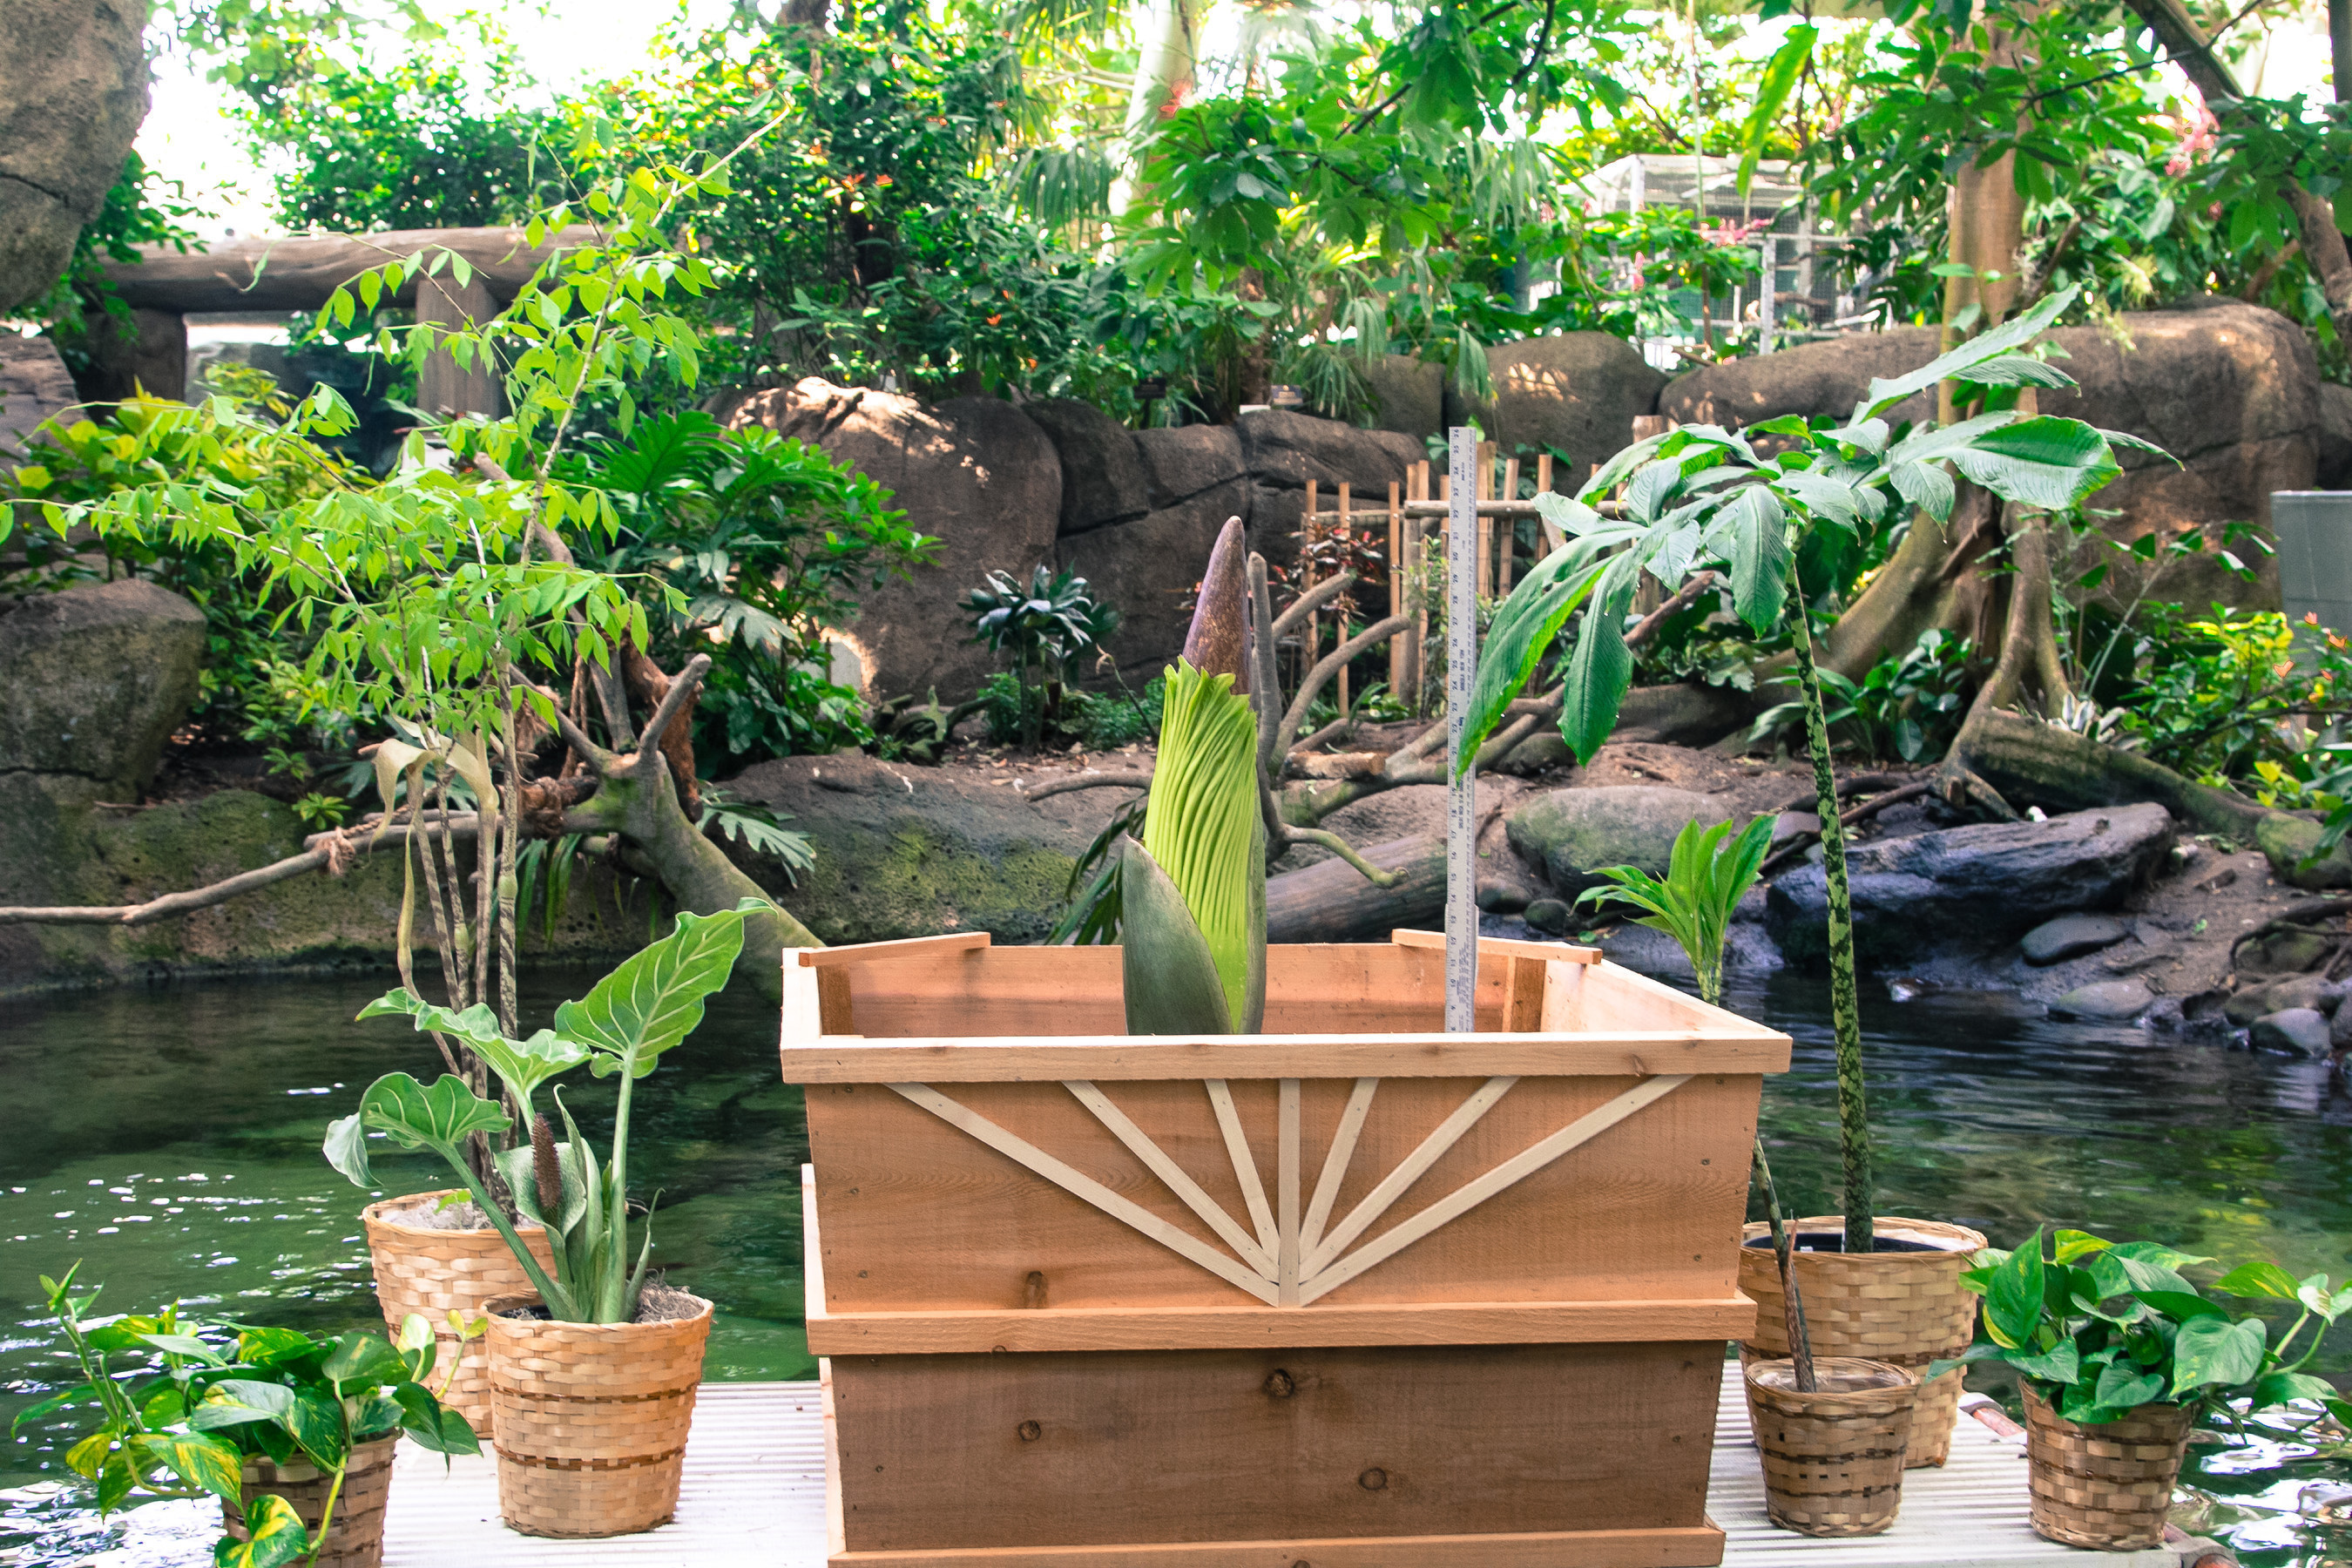 A rare Corpse Flower named "Morticia" is expected to bloom within the next week at Moody Gardens in Galveston, TX. It is one of only five to bloom in Texas and 122 in the U.S. since 1937. This is the second time for Morticia to bloom. It bloomed for the first time in 2012.